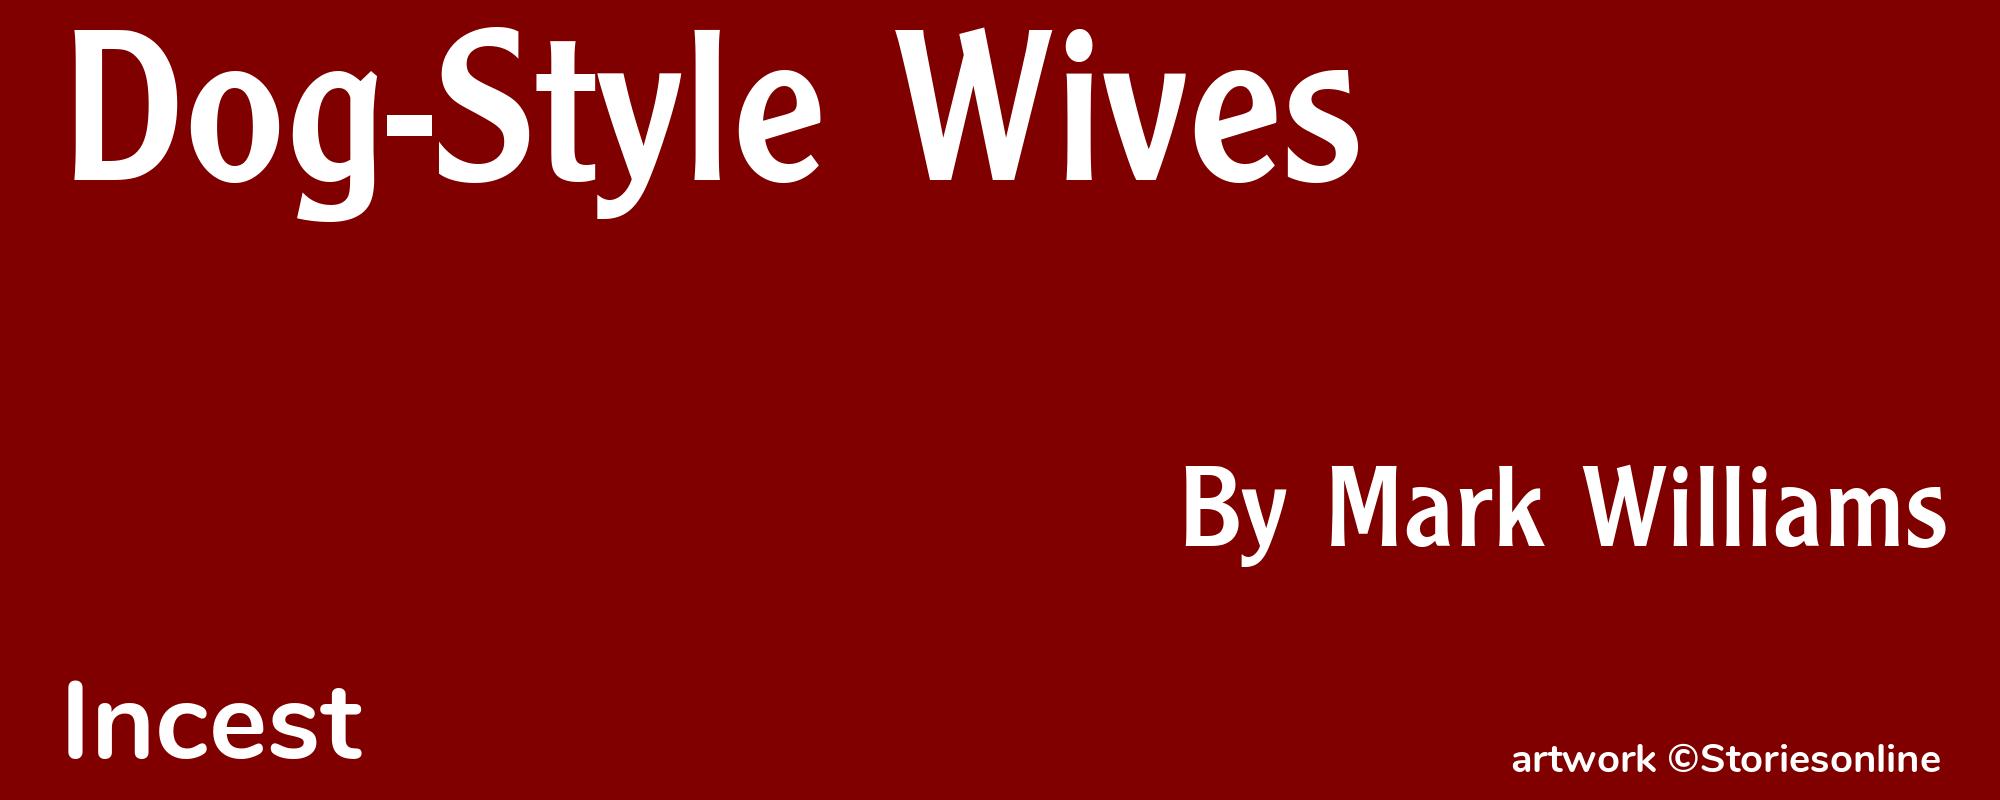 Dog-Style Wives - Cover